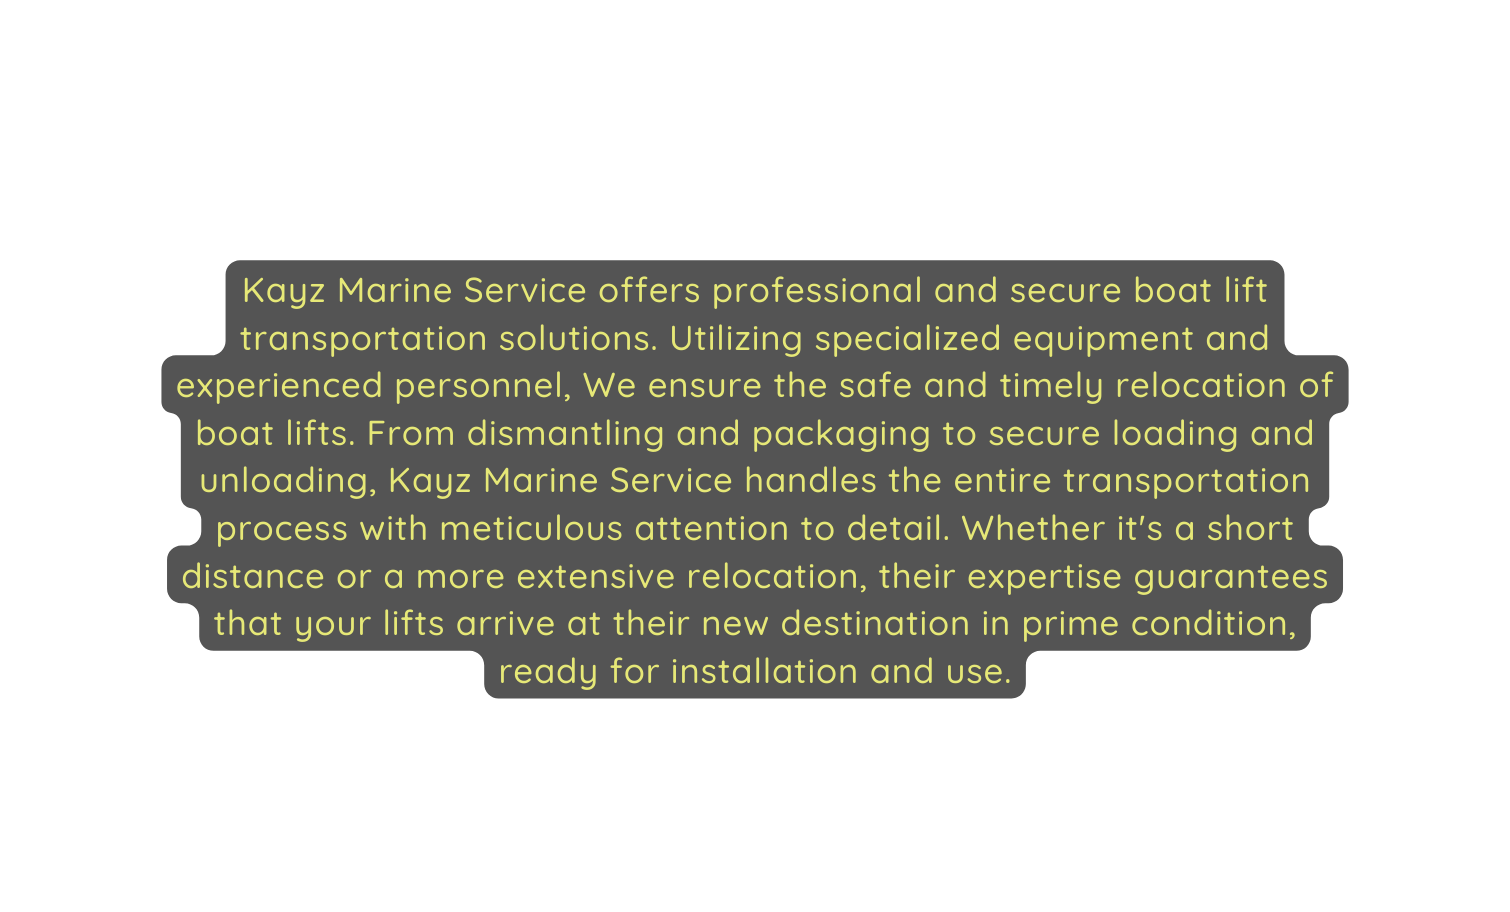 Kayz Marine Service offers professional and secure boat lift transportation solutions Utilizing specialized equipment and experienced personnel We ensure the safe and timely relocation of boat lifts From dismantling and packaging to secure loading and unloading Kayz Marine Service handles the entire transportation process with meticulous attention to detail Whether it s a short distance or a more extensive relocation their expertise guarantees that your lifts arrive at their new destination in prime condition ready for installation and use